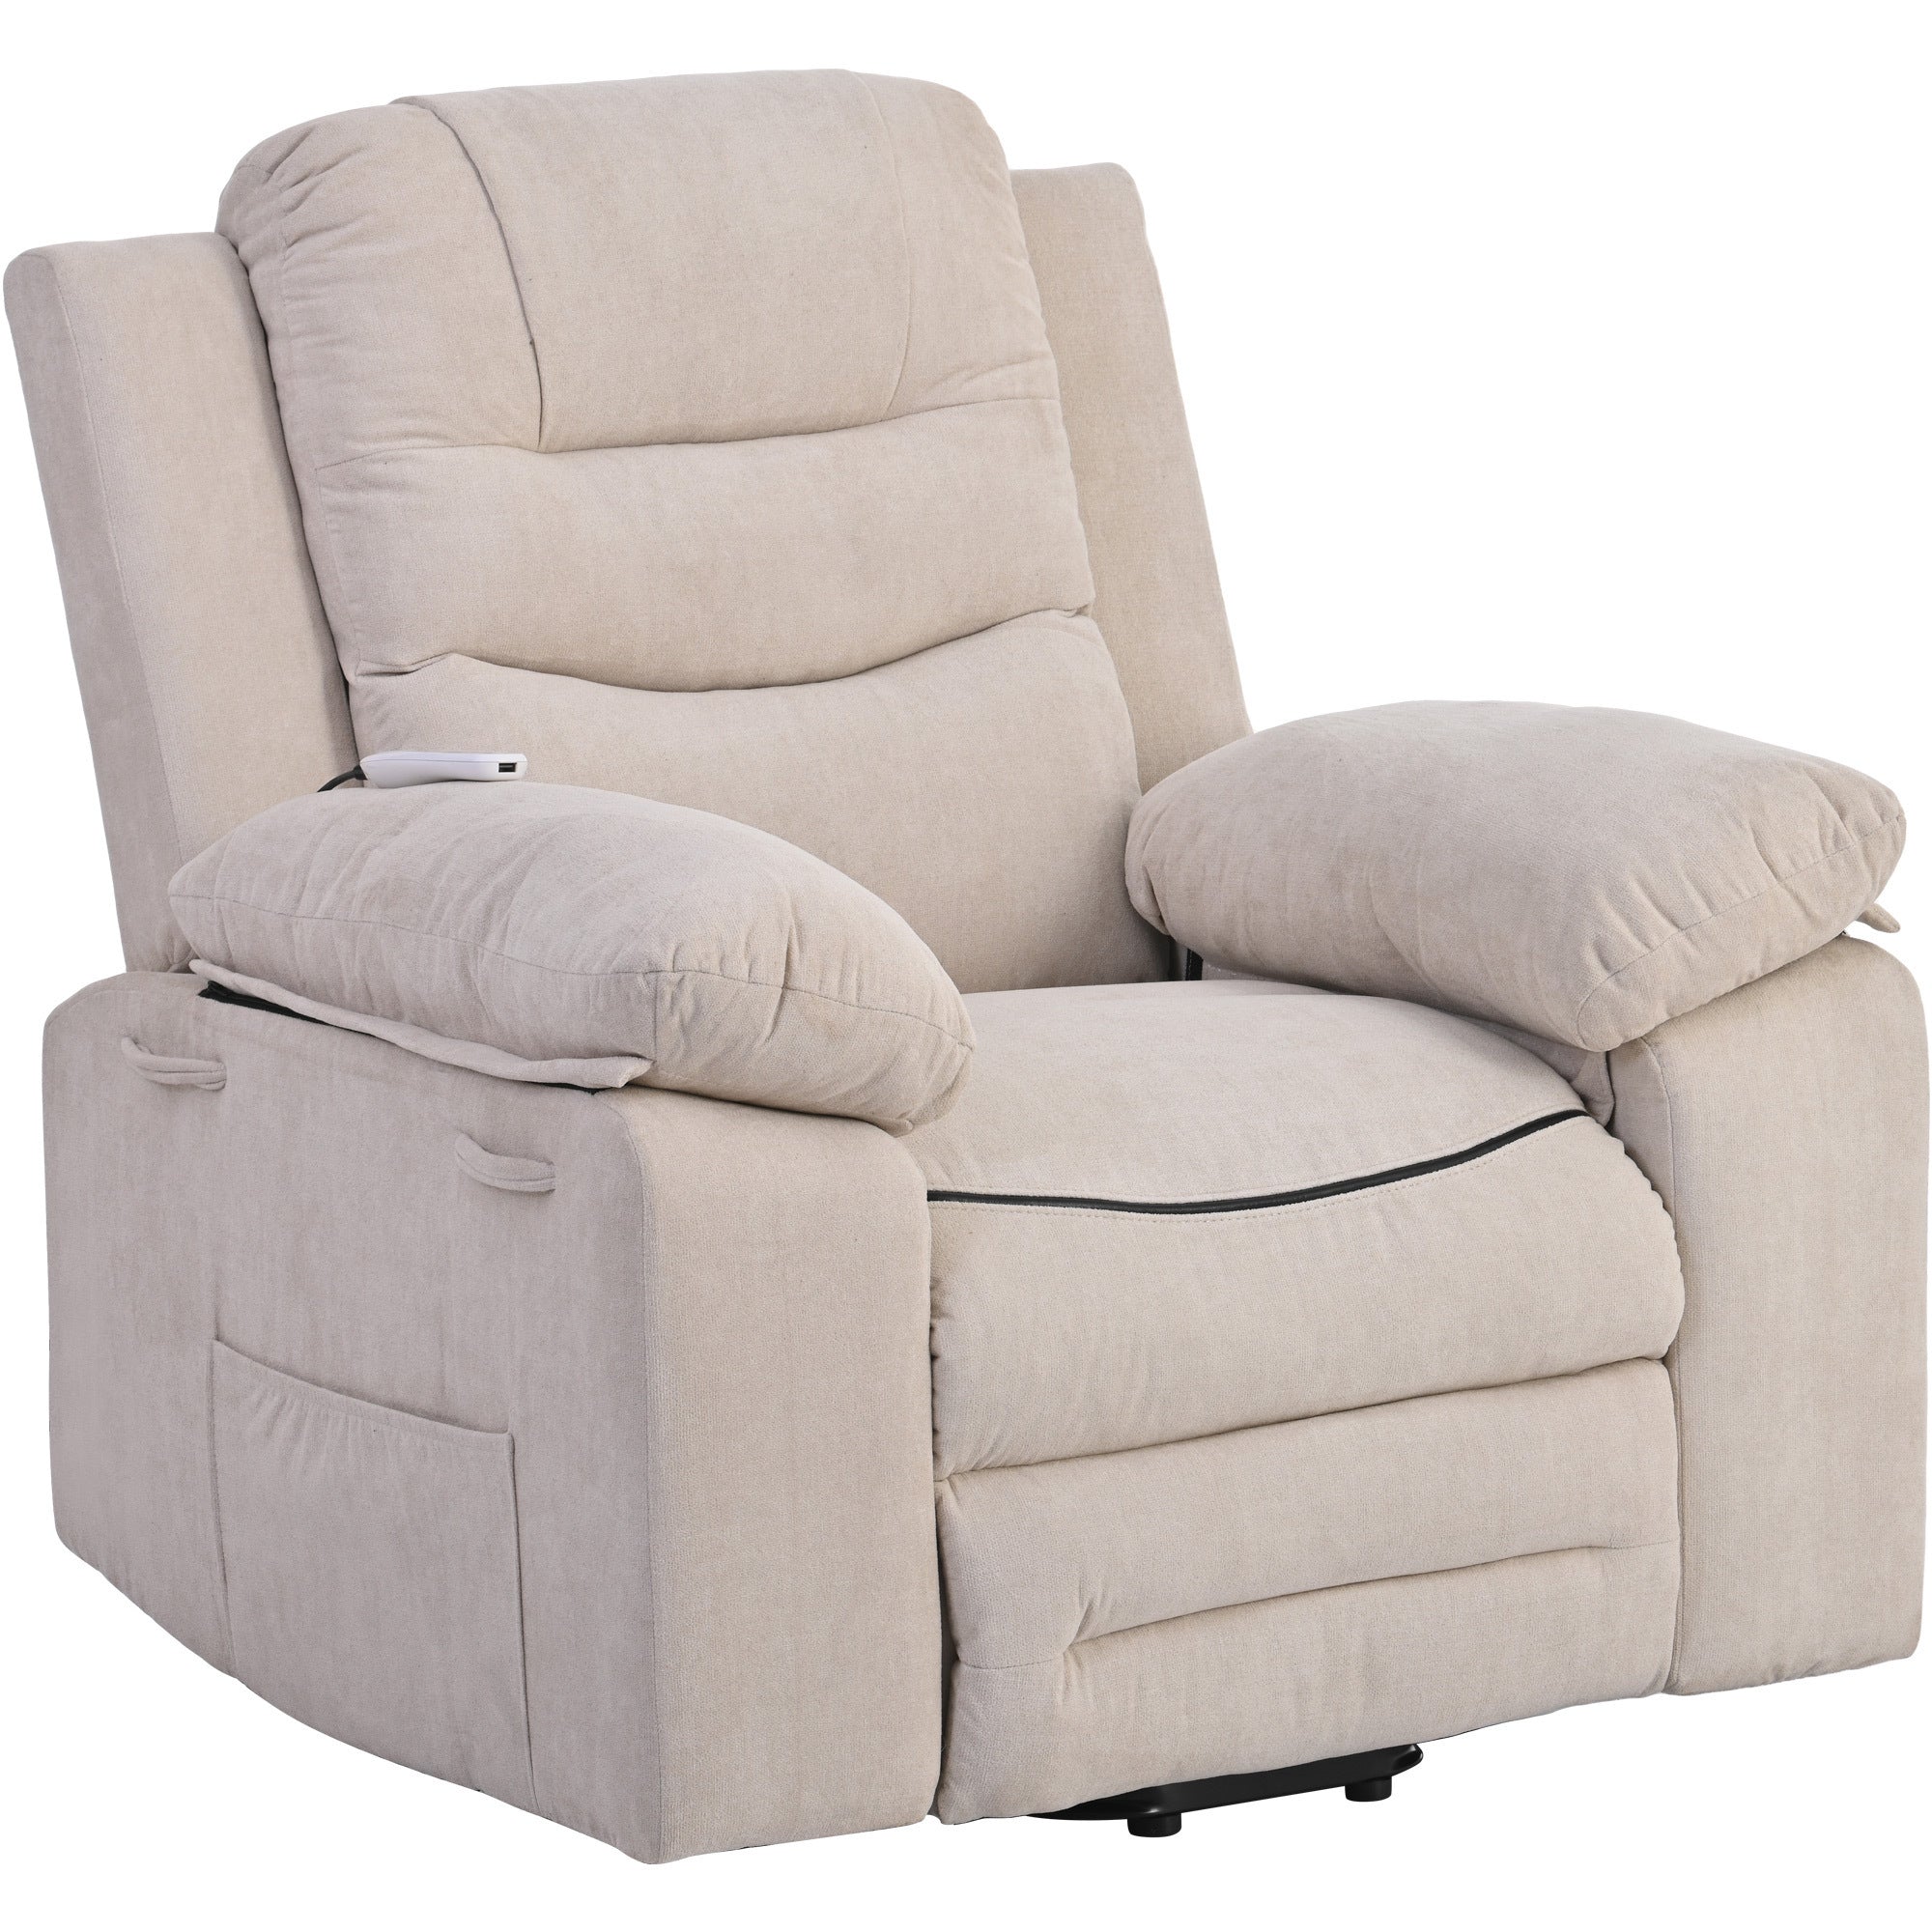 Beige infinite position massage and heat power lift recliner, seated with extension